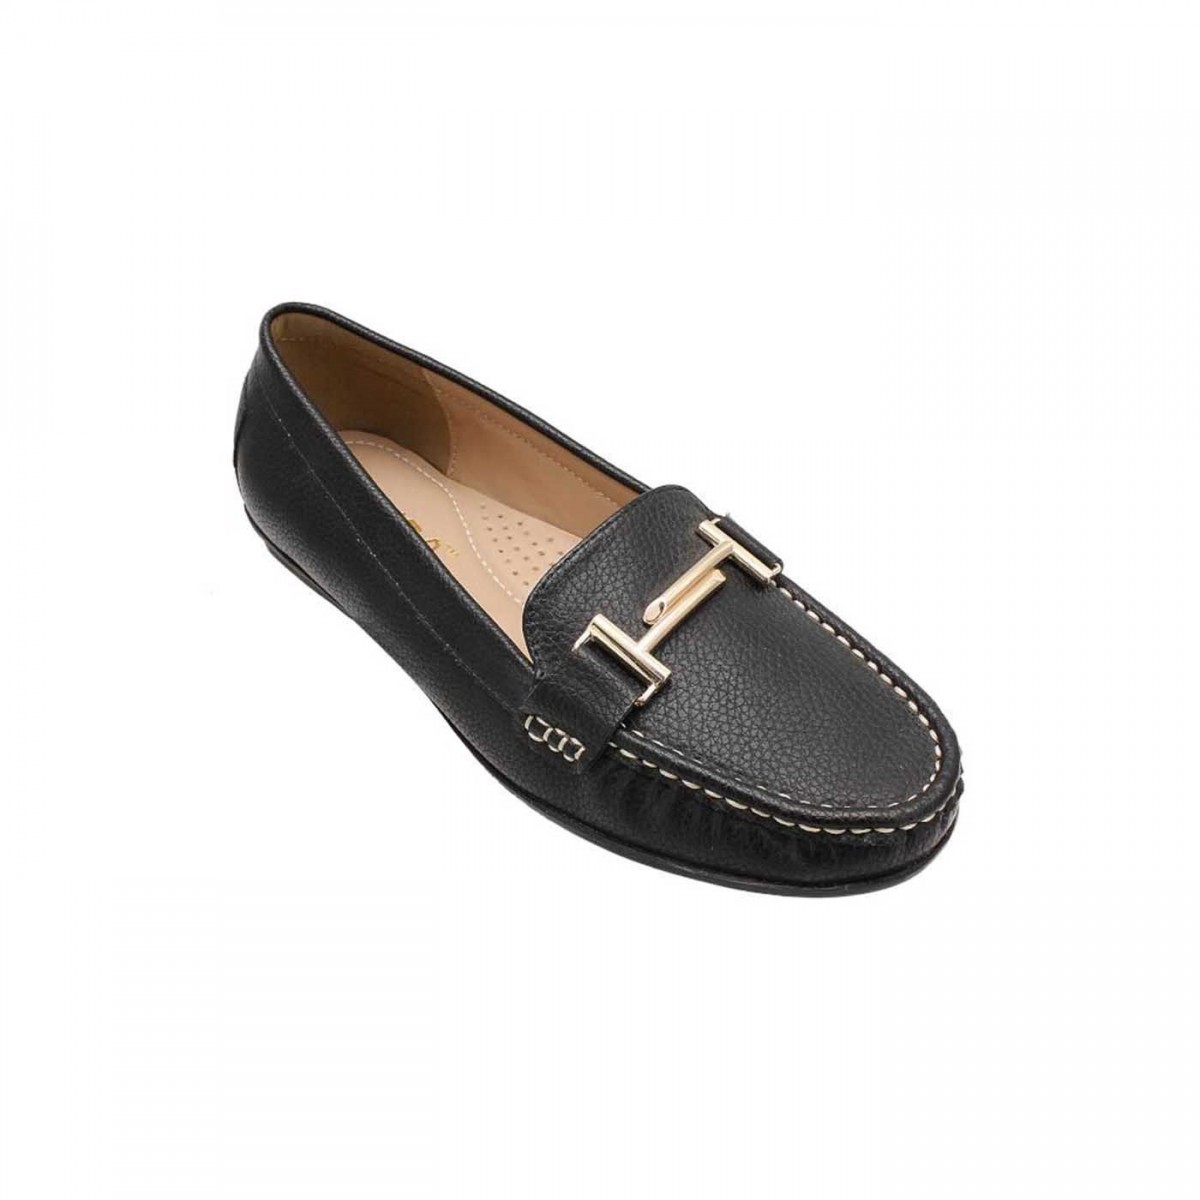 /2019/08/liza-buckled-casual-loafers-lz-cf-0523-black-image1.jpeg